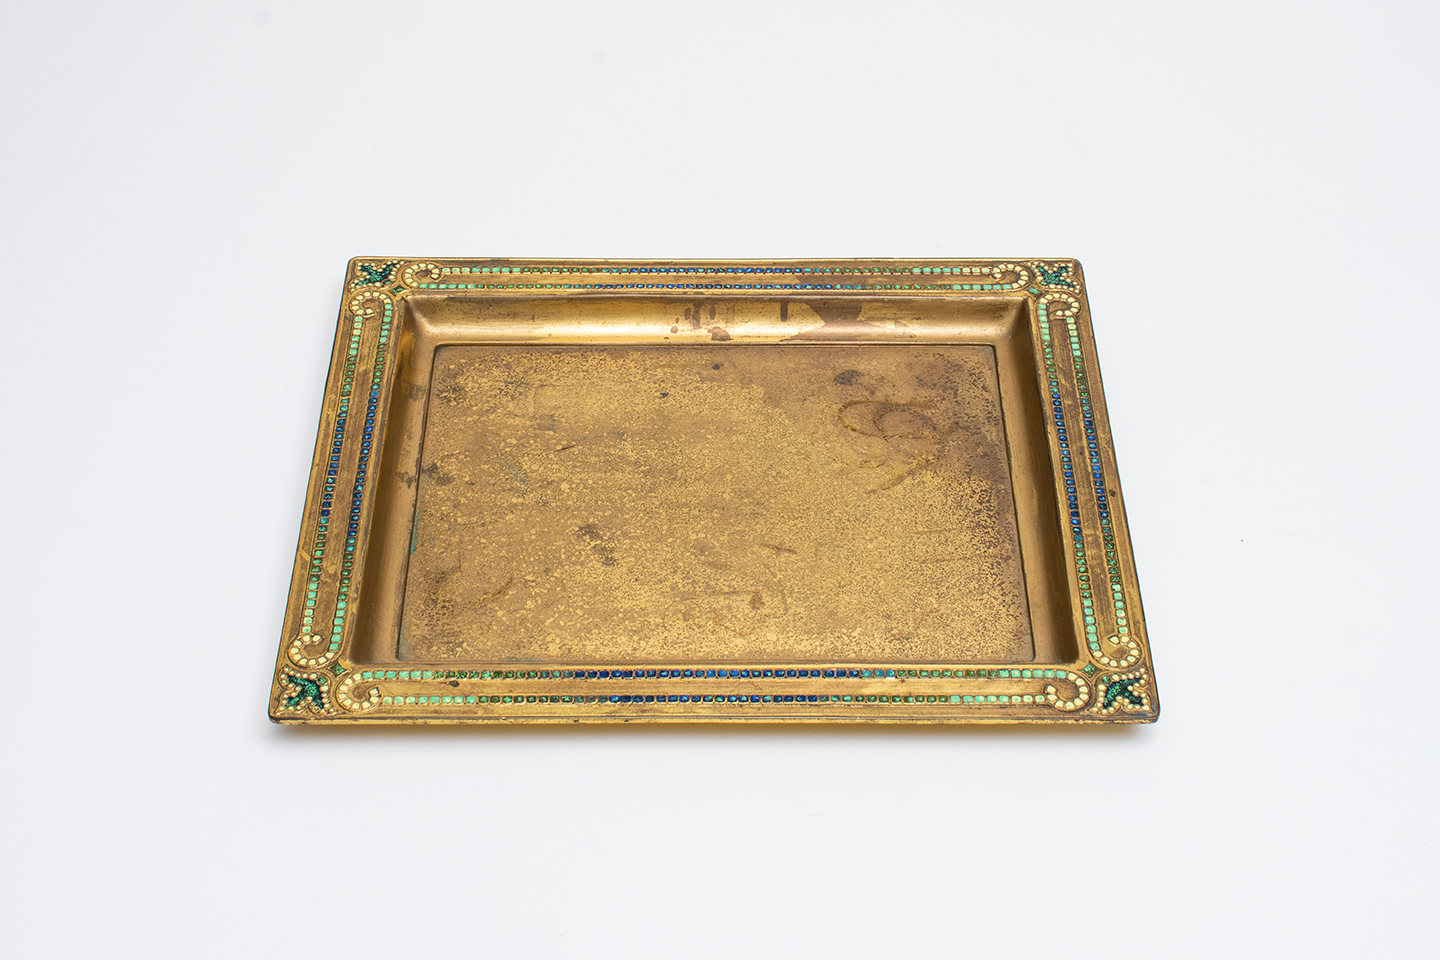 a shallow bronze rectangular tray in gold patina, the flattened raised rim with decoration in inset enamel ranging from yellow to blue, with stylized yellow fleur de is at each corner.